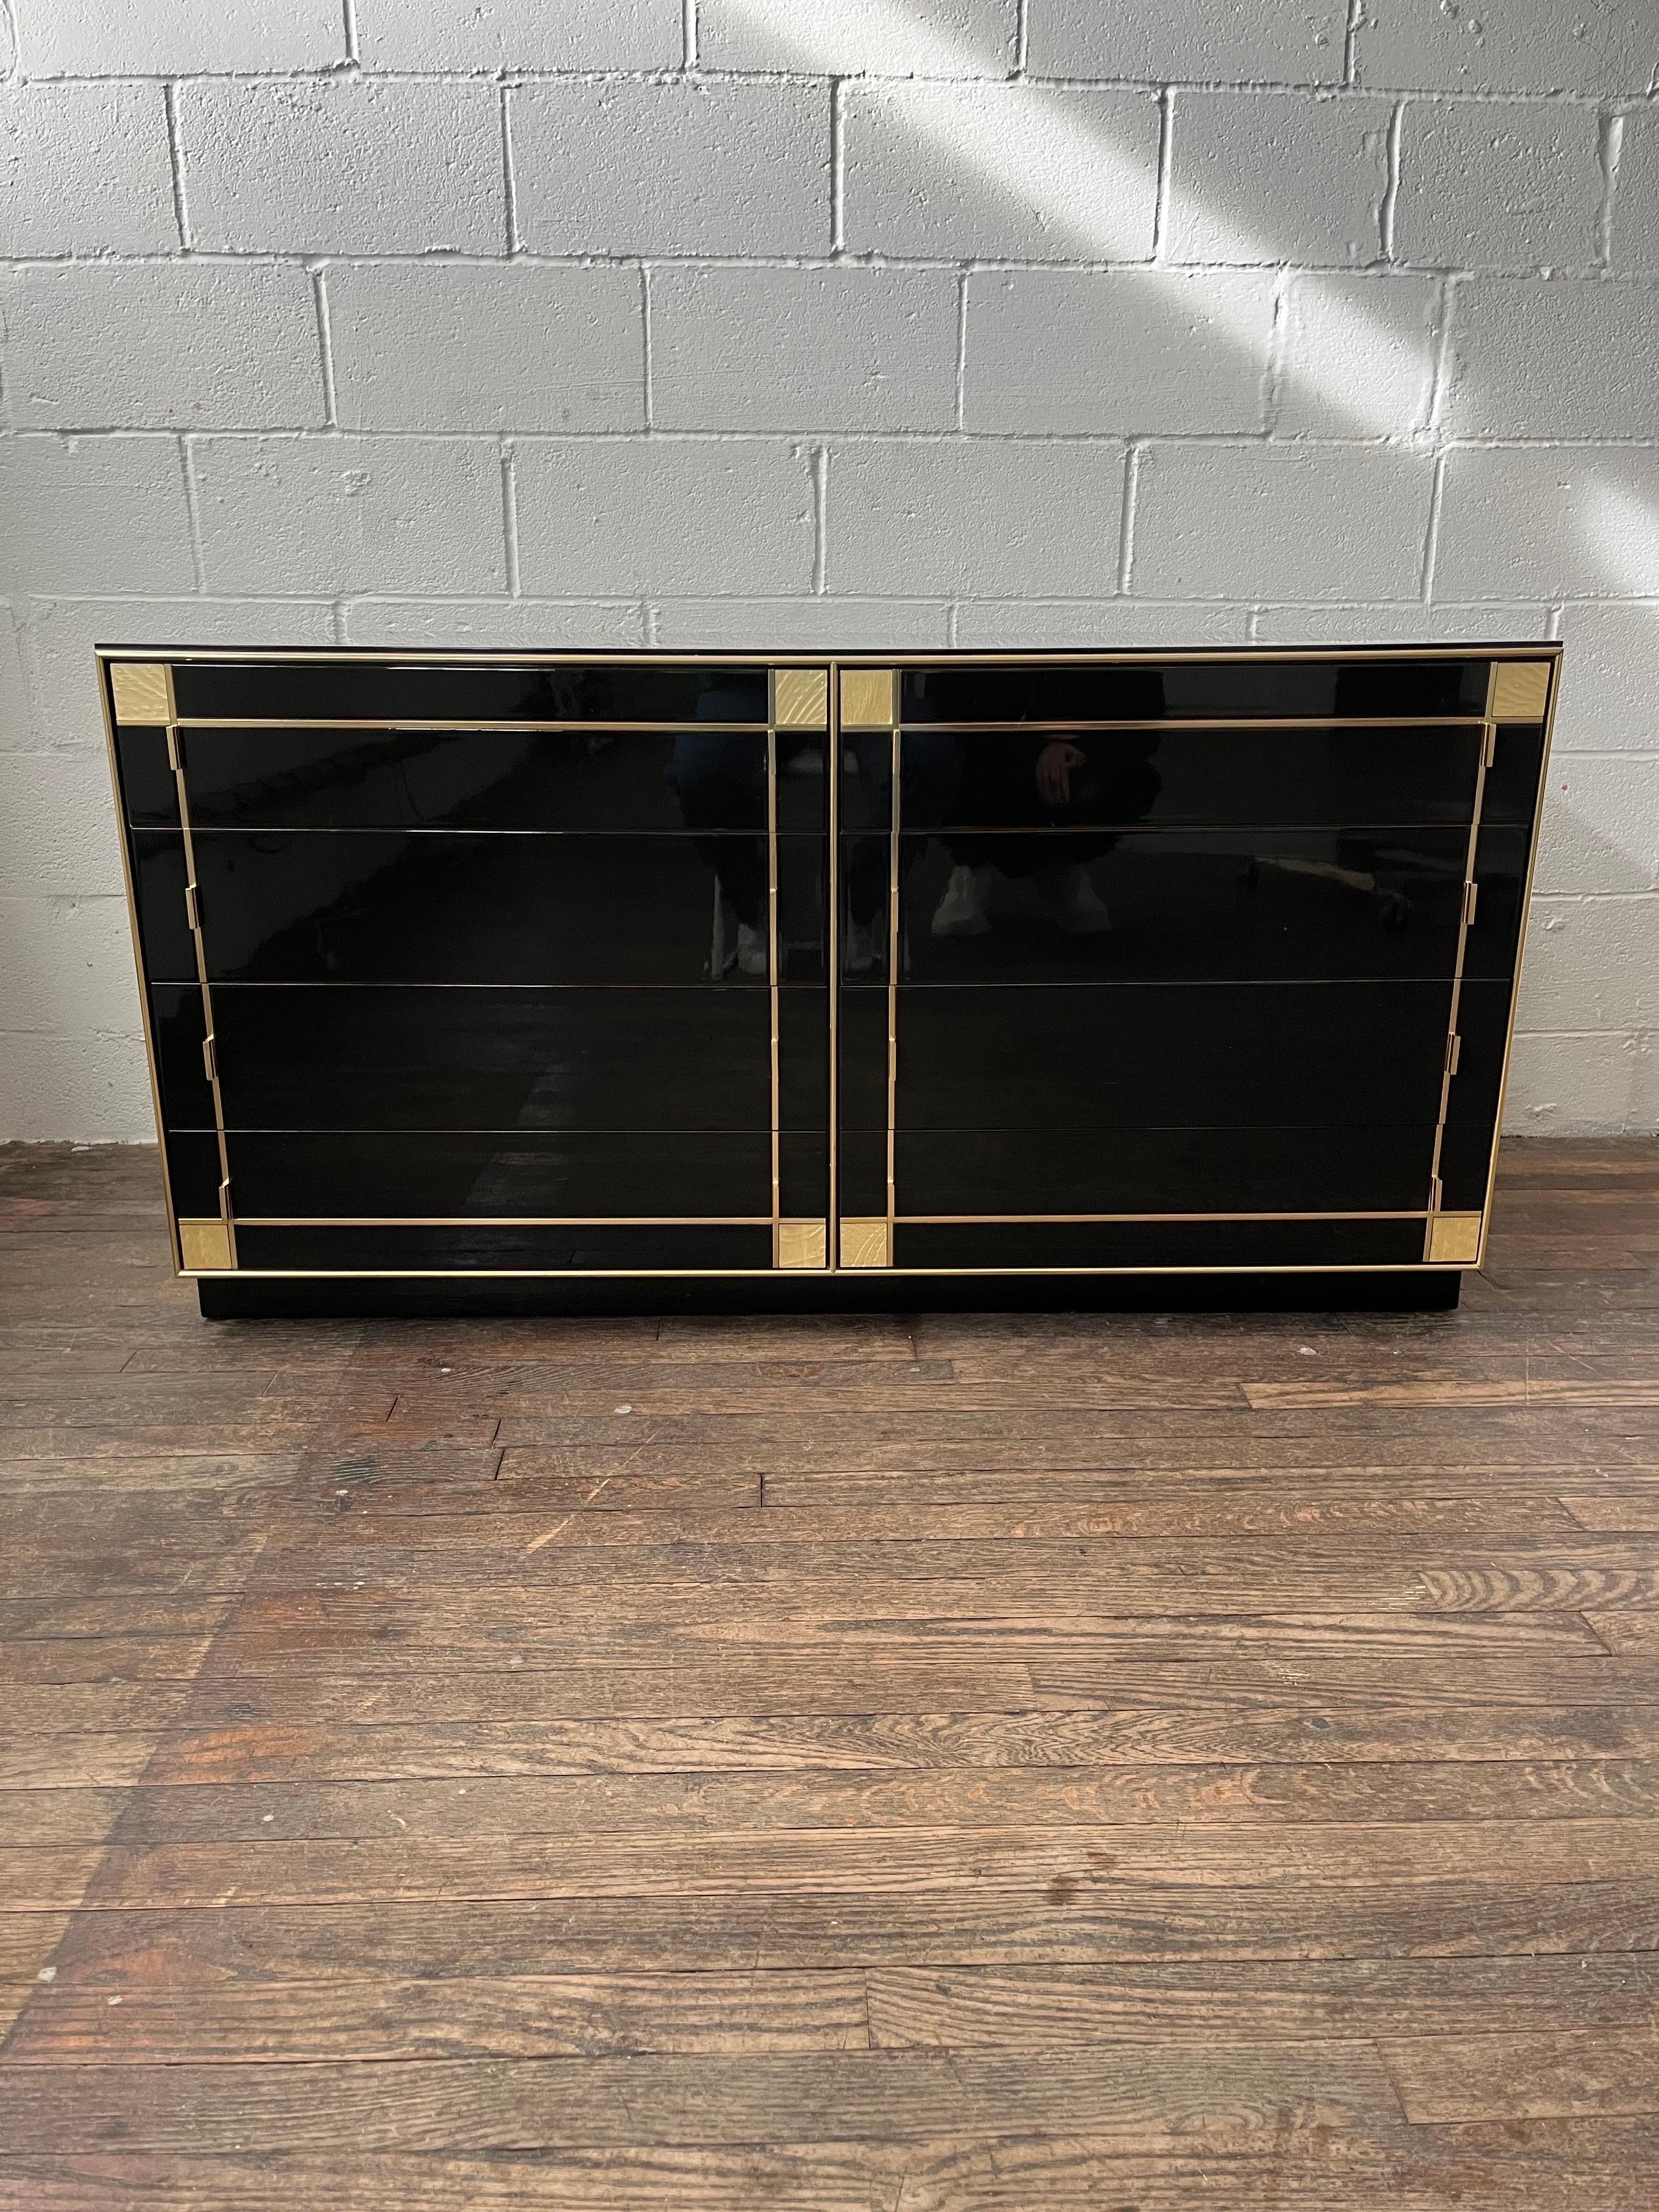 French black Lacquered 8 drawer dresser by Pierre Cardin. Manufactured by Roche Bobois. This piece features gilt brass trim throughout. The strong craftsmanship combined with the elegant lines add a sleek touch to any storage solution.
Nightstands